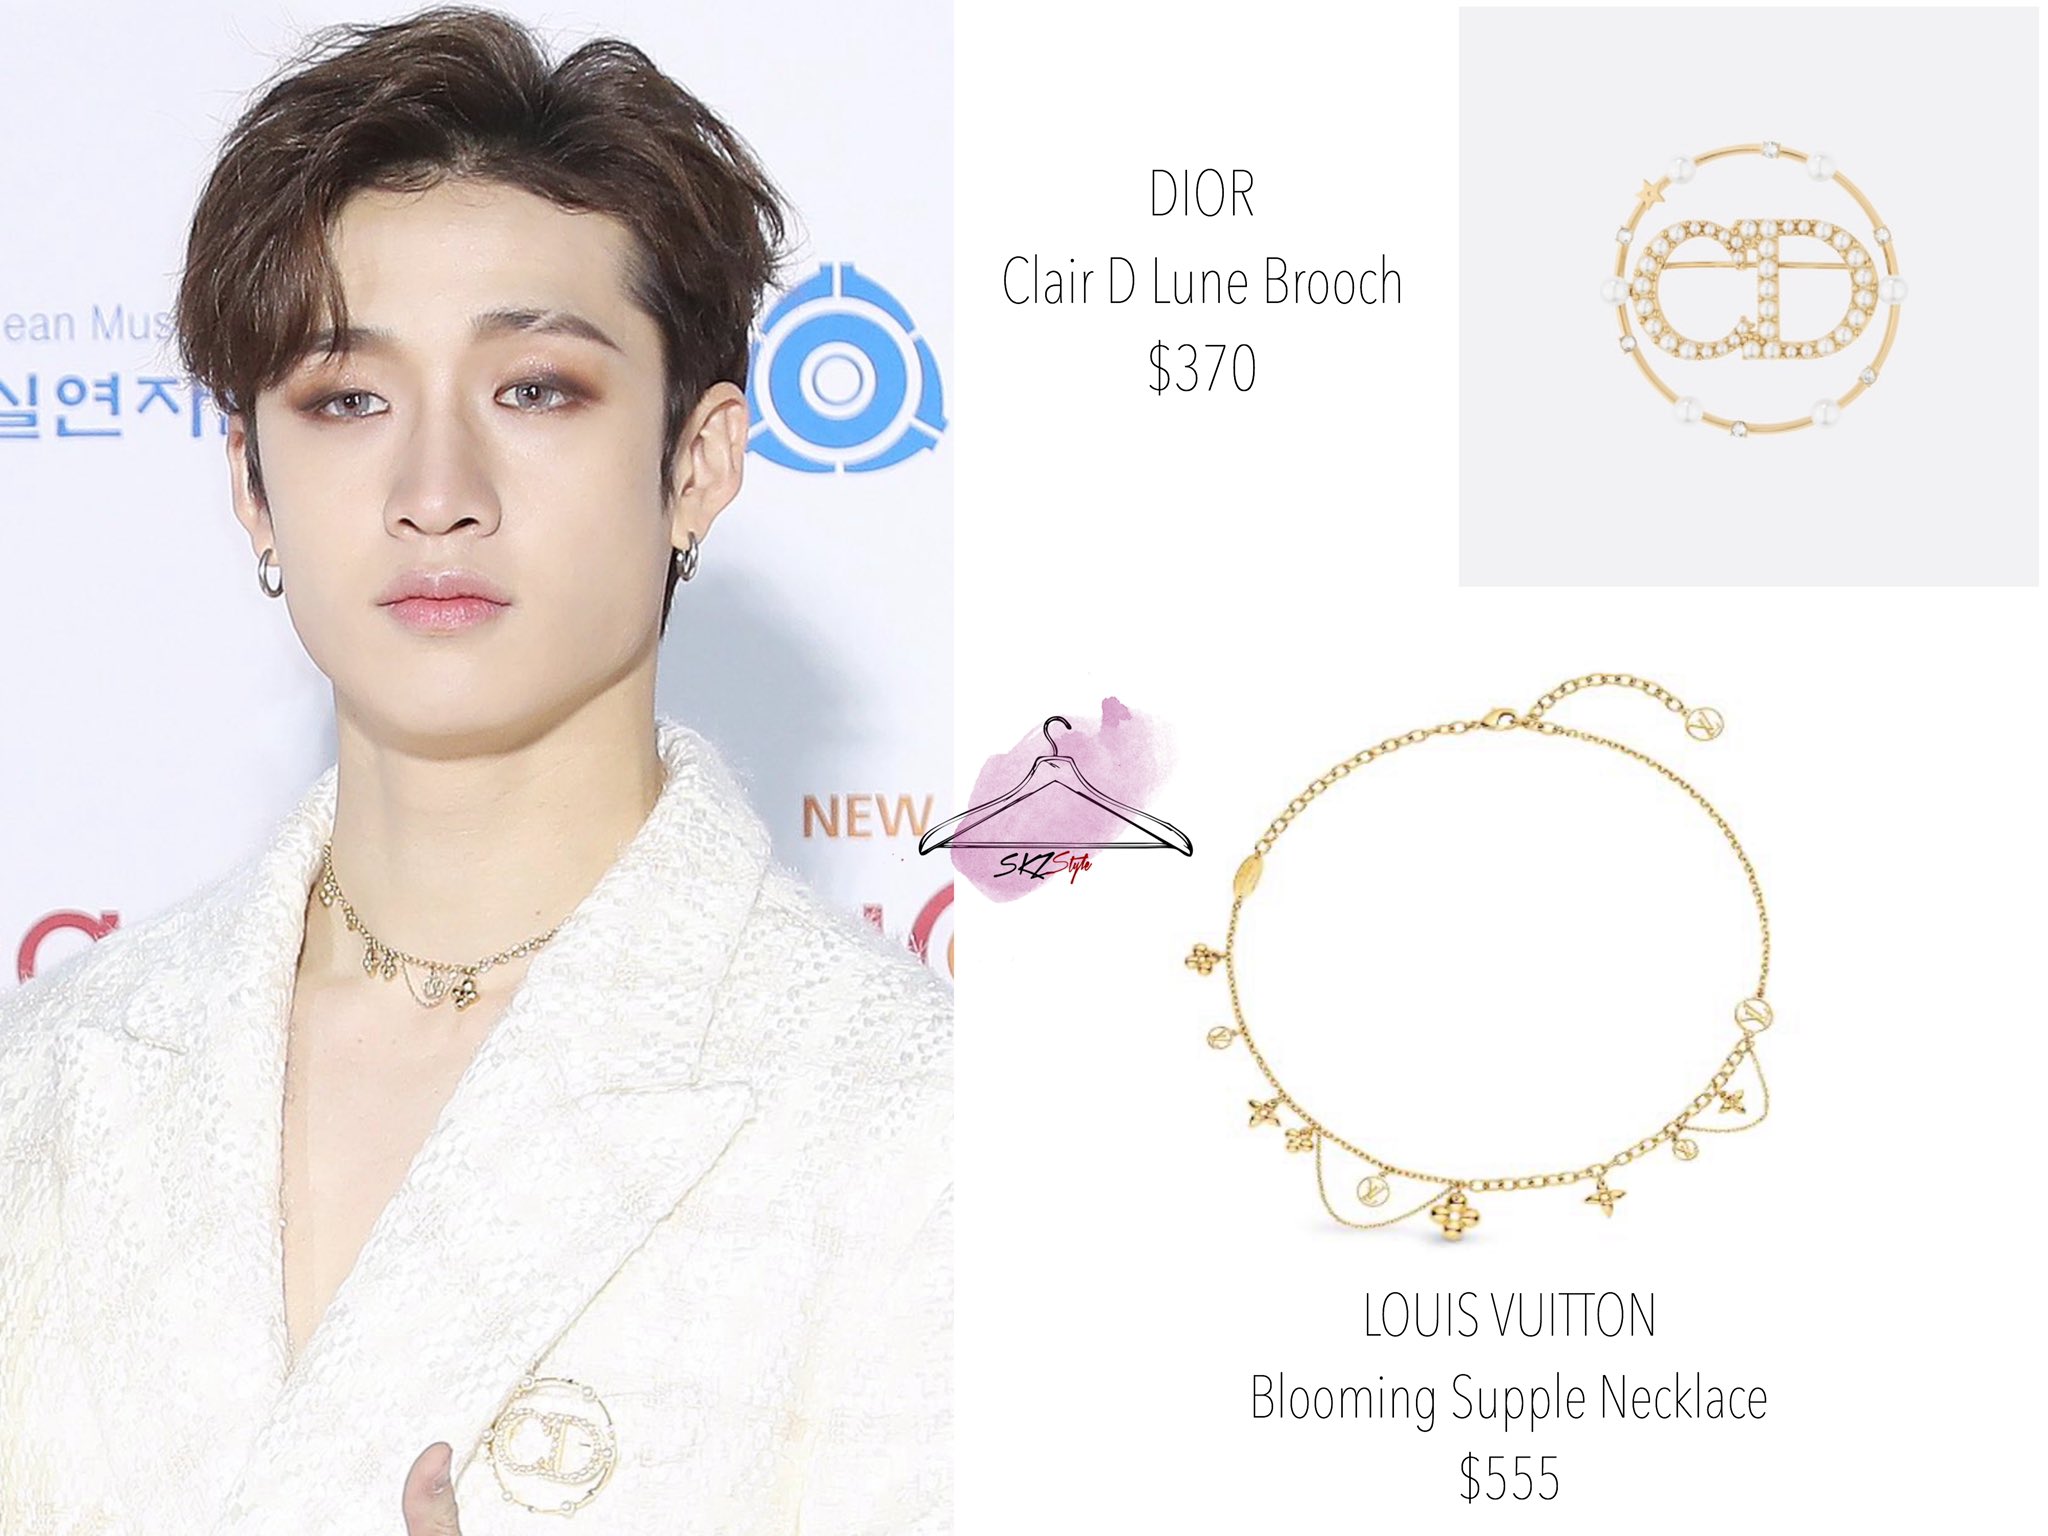 Fremtrædende Ledningsevne for meget Stray Kids Style on Twitter: "[200108] CHAN at 9th Gaon Chart Music Awards  Red Carpet Accs : DIOR Clair D Lune Brooch $370 LOUIS VUITTON Blooming  Supple Necklace $555 © news #BANGCHAN #